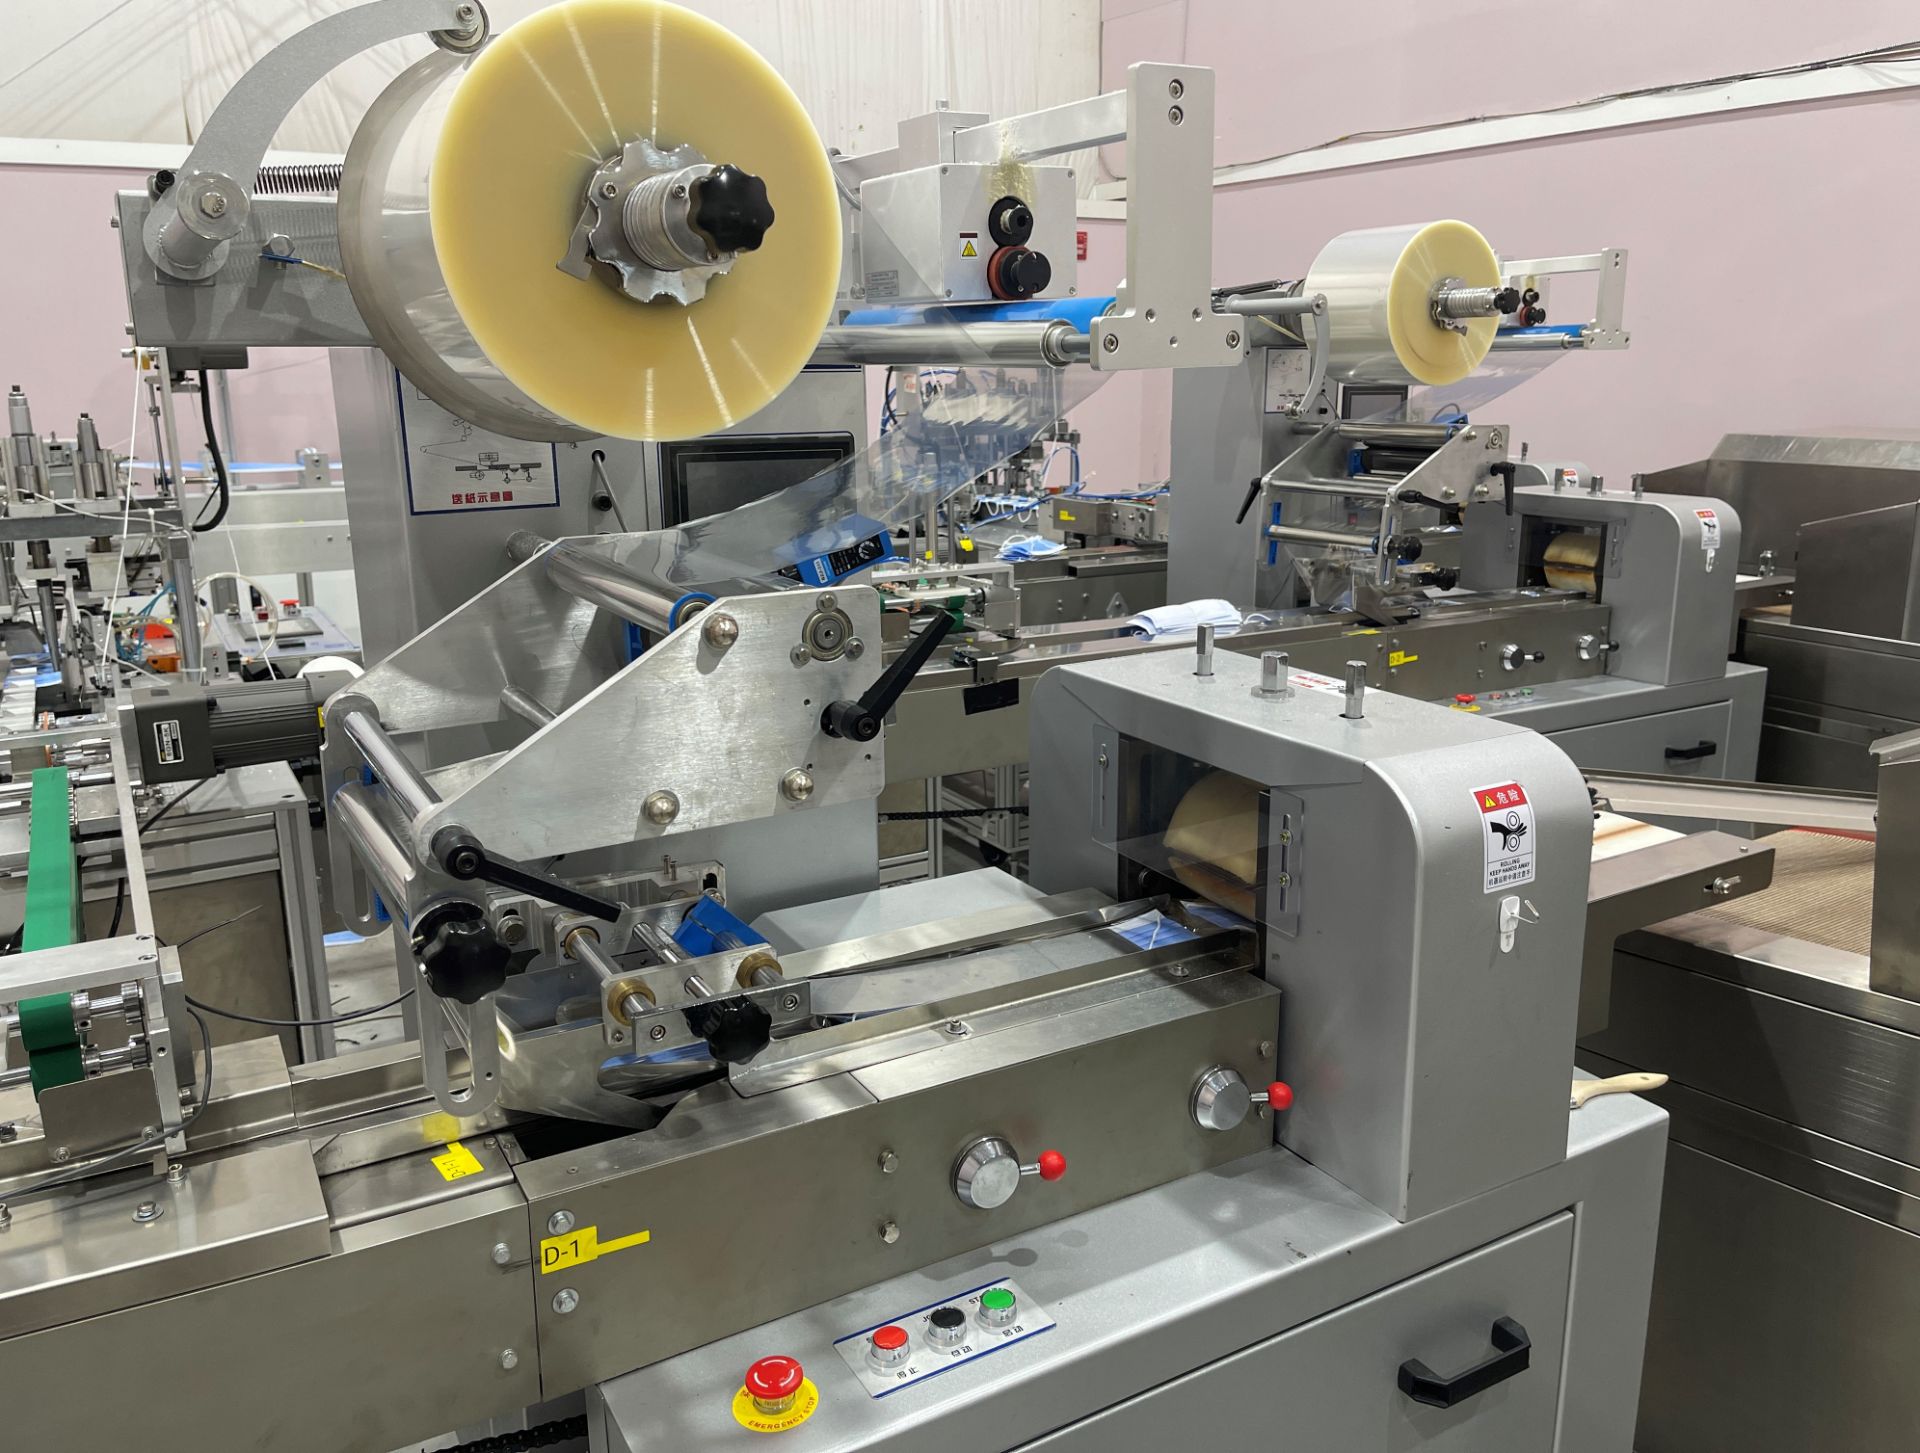 COMPLETE PACKAGE: 2020 3-Ply Disposable Medical Mask Assembly & Packaging Line Equipment, Includes: - Image 9 of 150